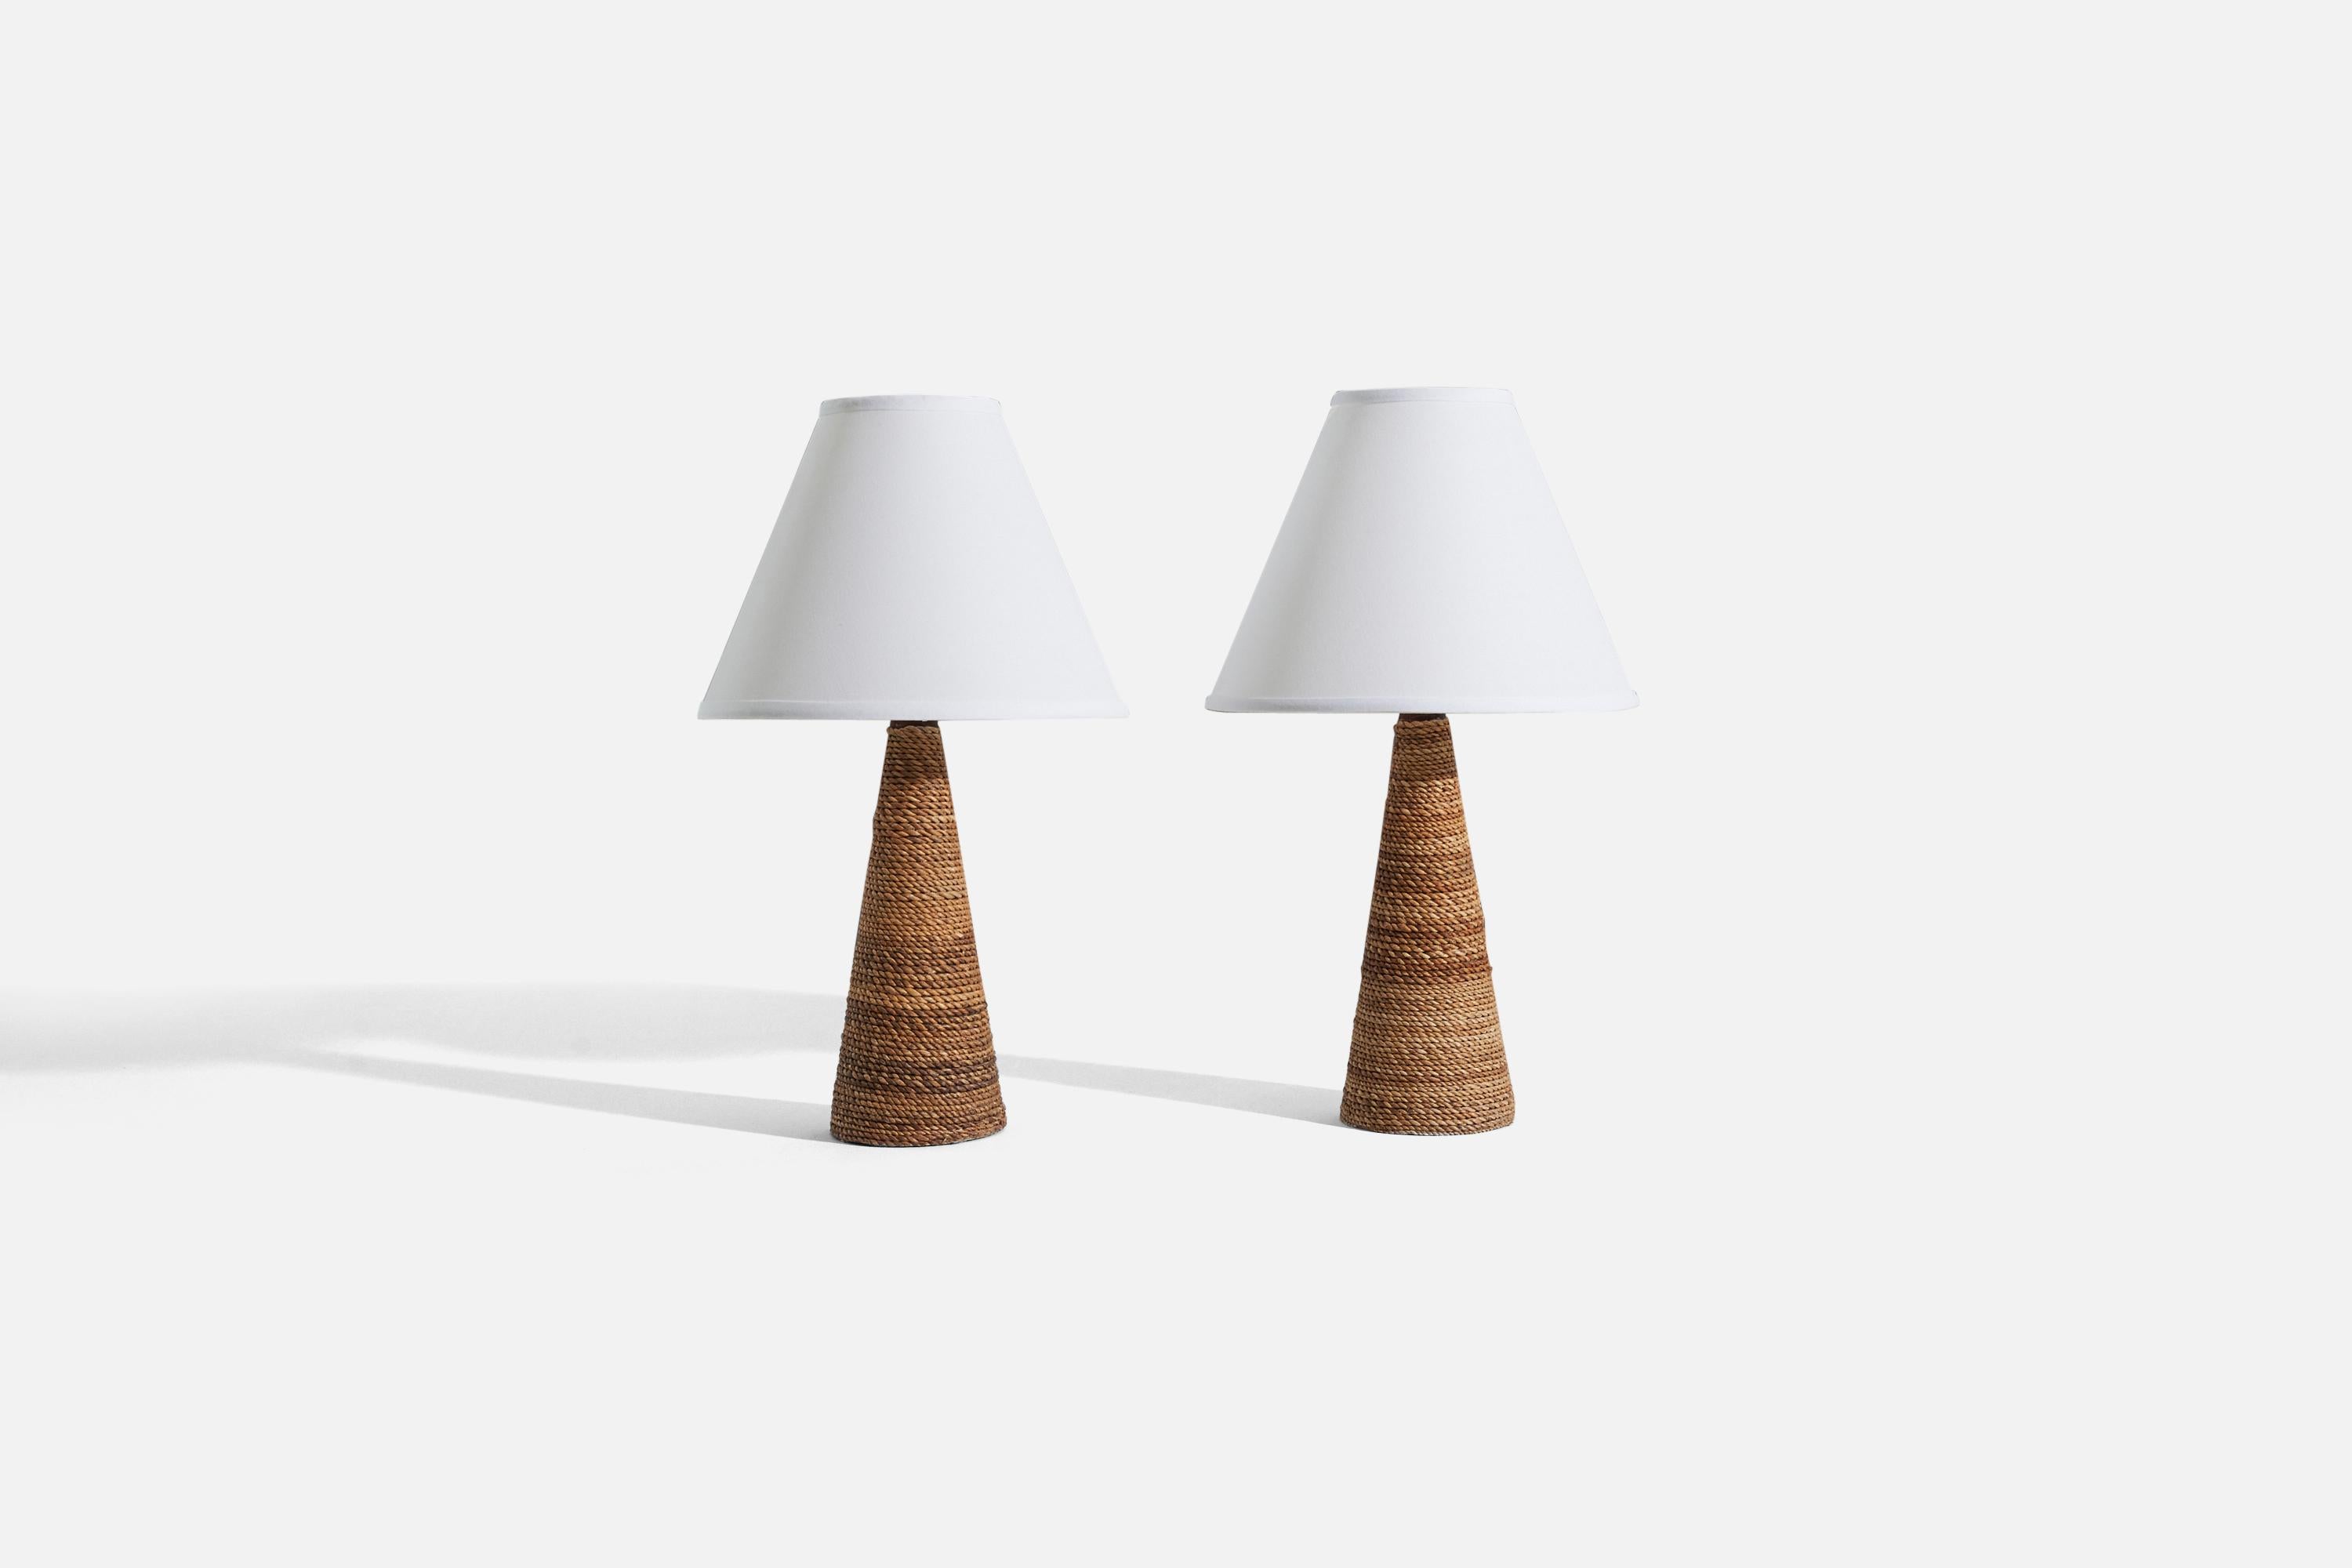 A pair of wood and waxed cord table lamps, designed and produced by Tarogo Japan, Philippines, c. 1980s-1990s.

Sold without lampshade. 
Dimensions of Lamp (inches) : 13.6875 x 4.125 x 4.125 (H x W x D)
Dimensions of Shade (inches) : 4 x 10 x 8 (T x